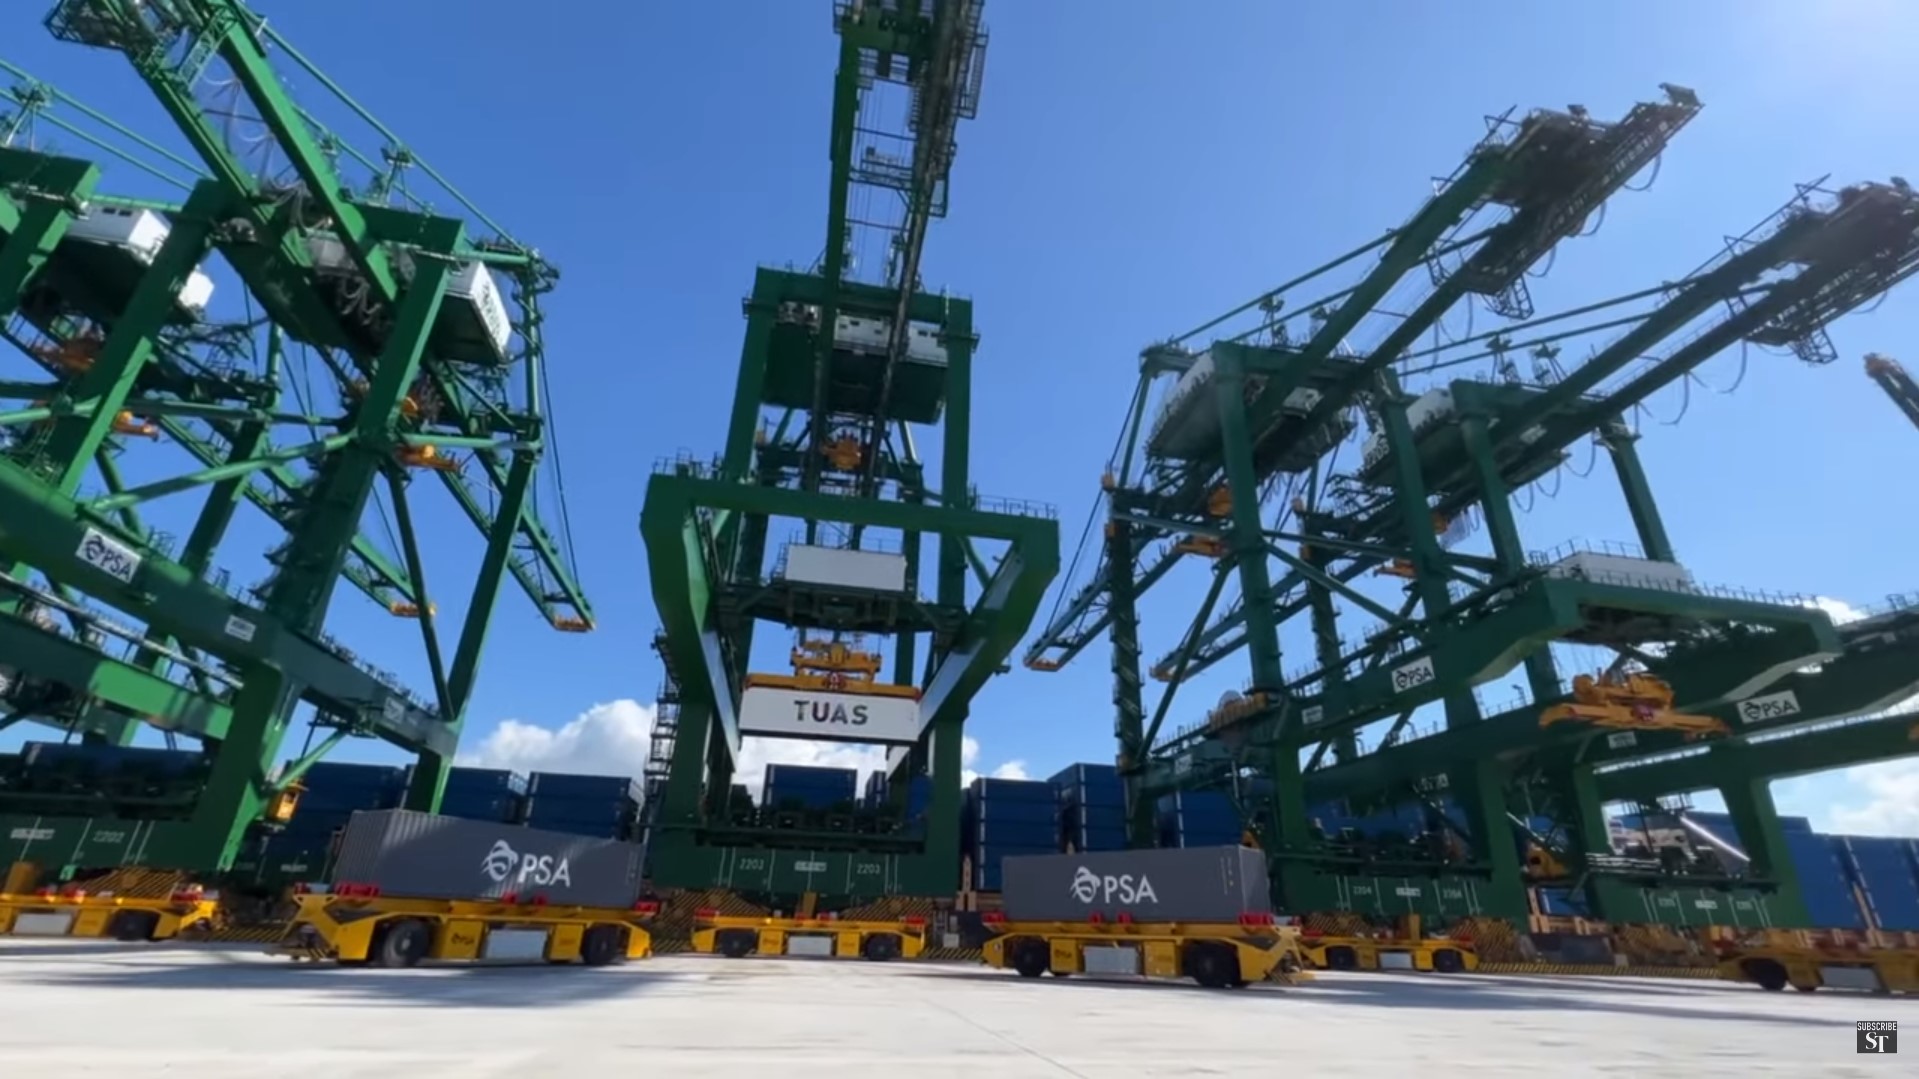 Tuas Port officially opens as freight volumes reach record high levels